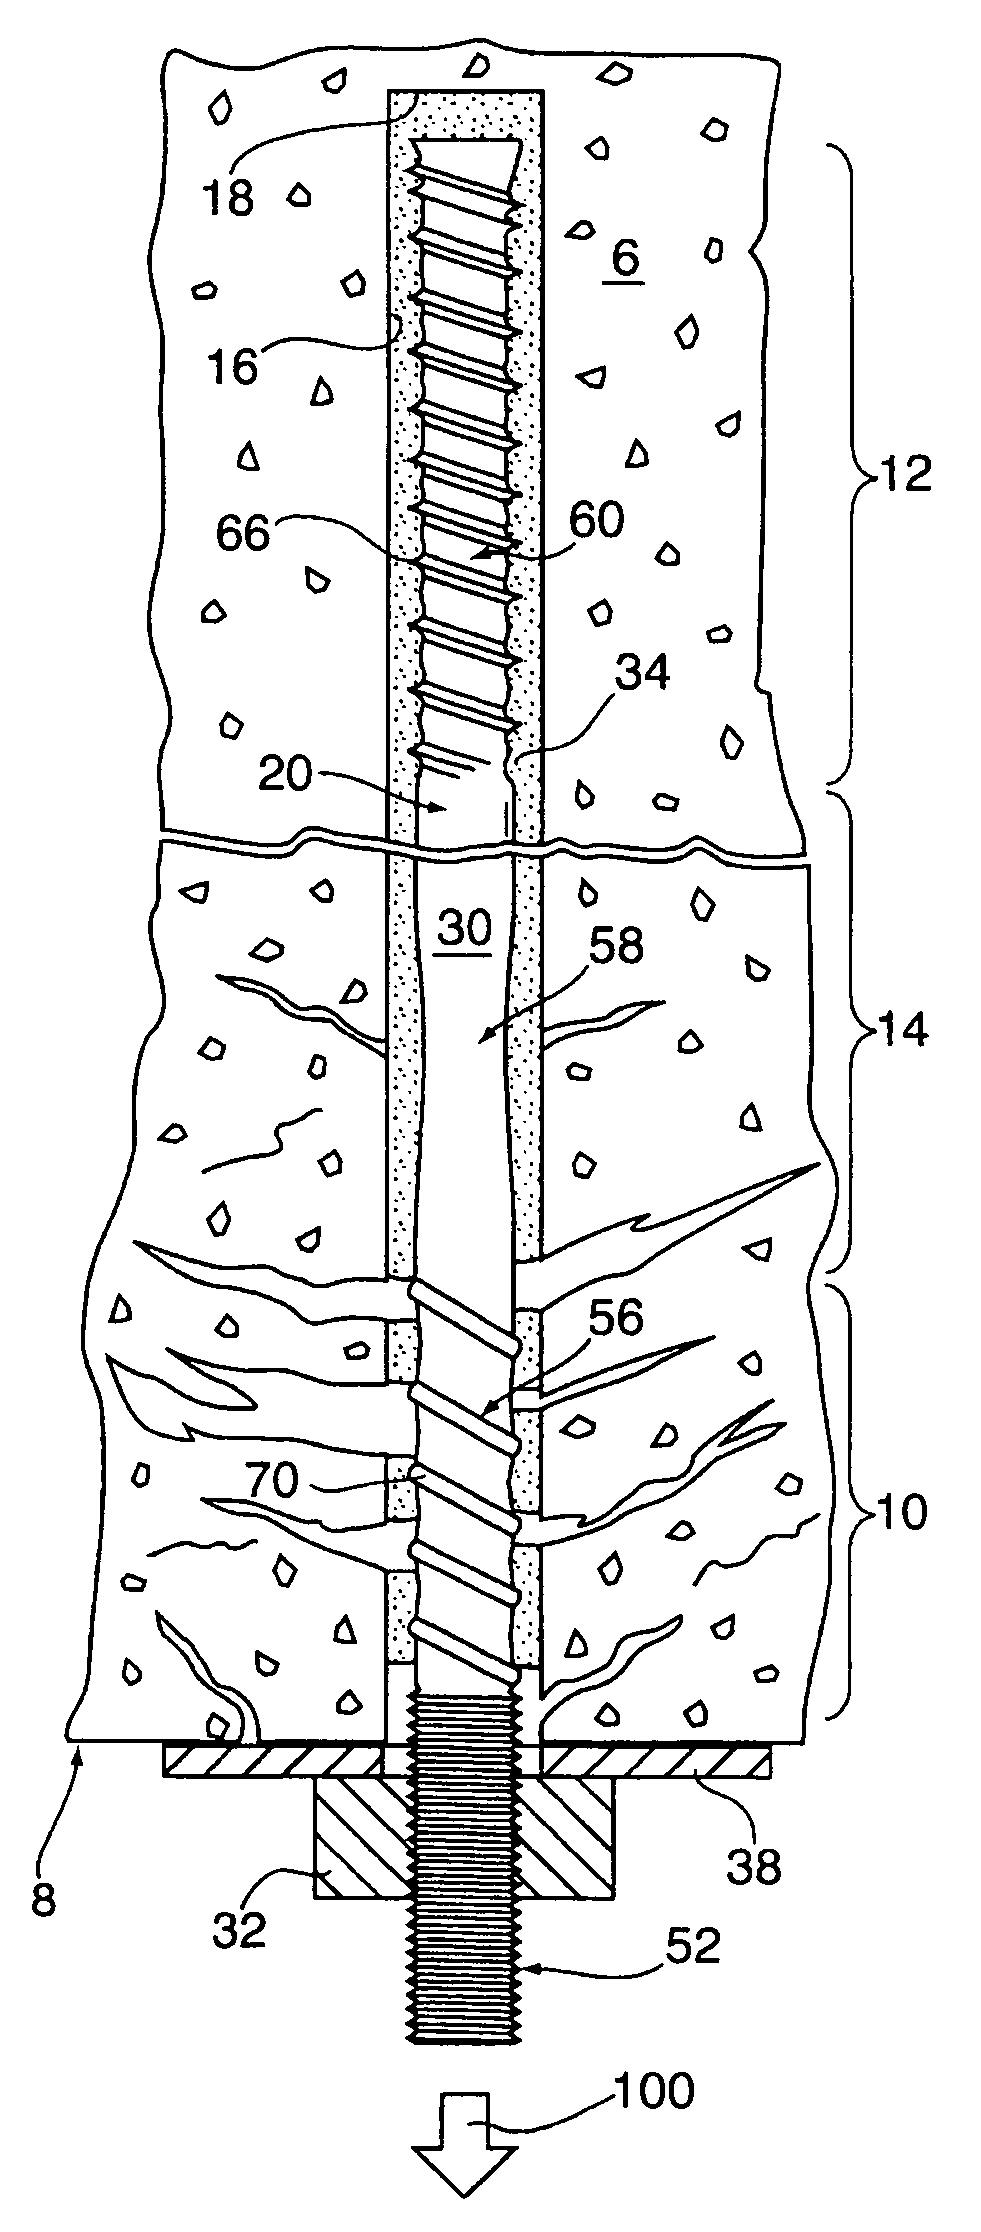 Anchor tendon with selectively deformable portions